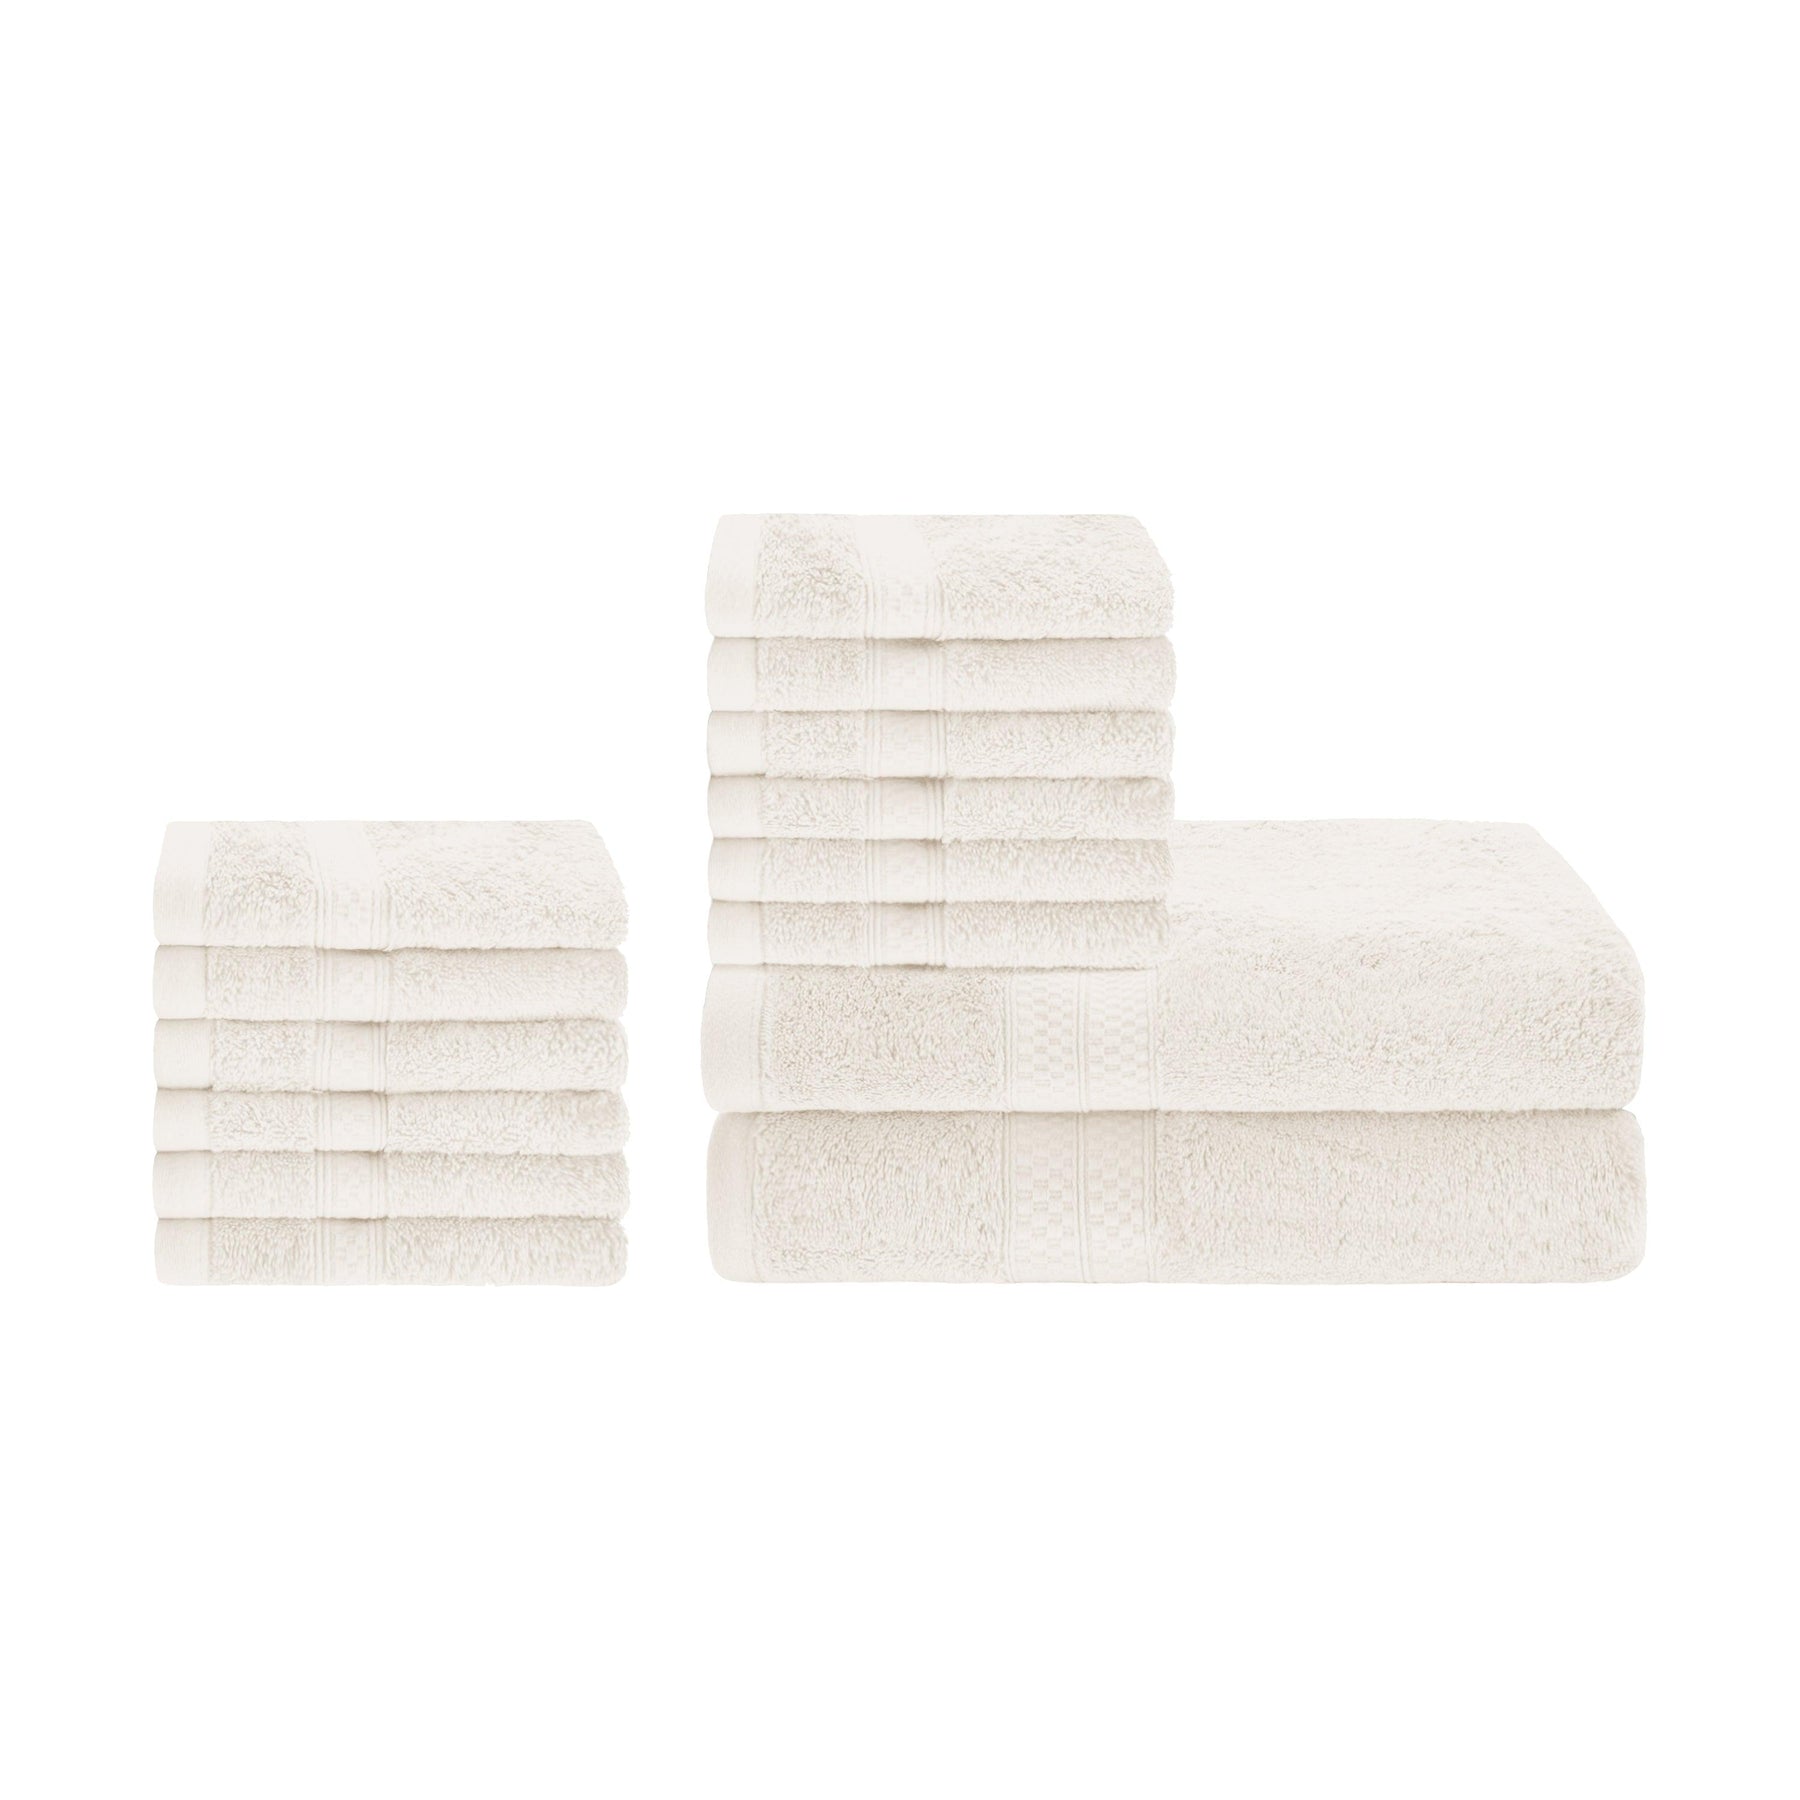 Ultra-Soft Hypoallergenic Rayon from Bamboo Cotton Blend Bath and Face Towel Set - Ivory